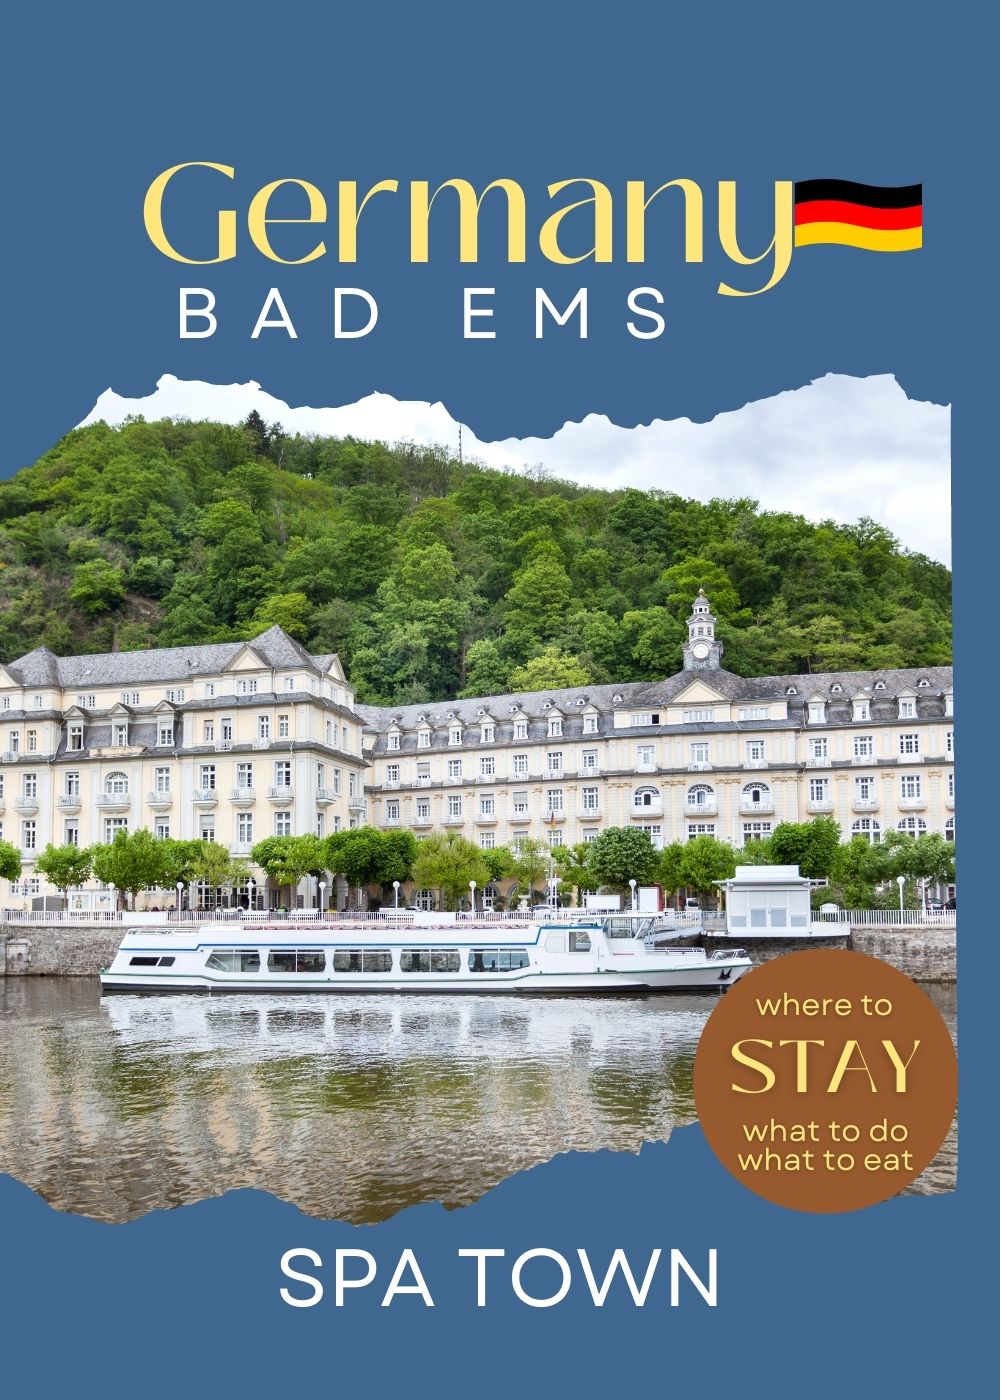 Visit Bad Ems in Germany what to see and do where to stay and what to eat great spa towns of Europe